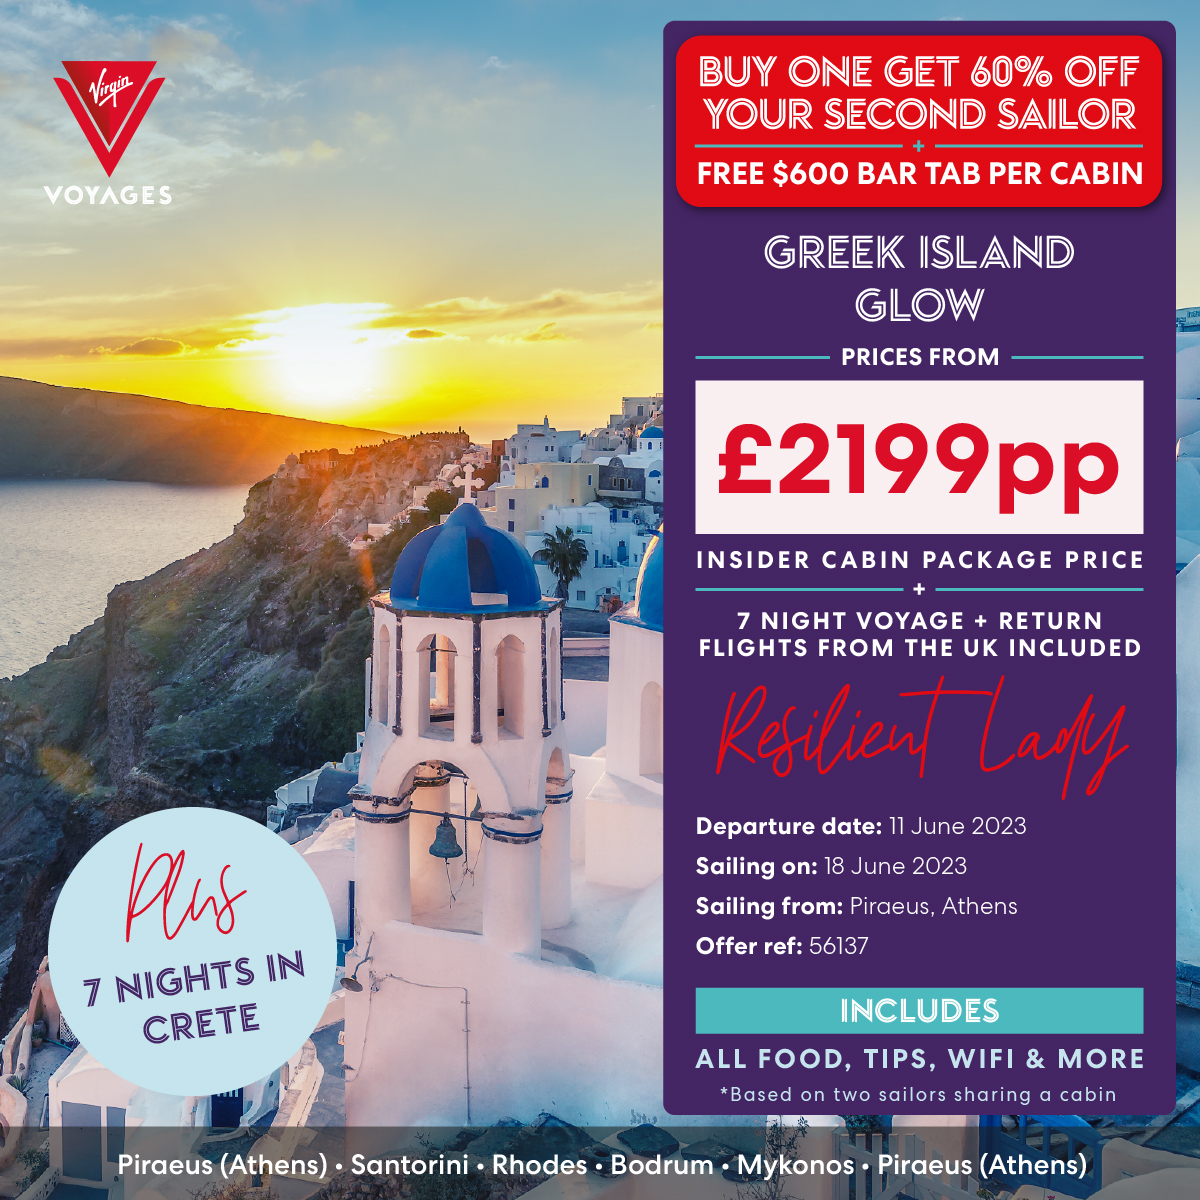 Set sail the Virgin Voyages way onboard the beautiful Resilient Lady on  sampling of the best Greek Islands. Whether you are looking for beautiful sunsets, or delectable plates to dine on, the Greek isles has it all.